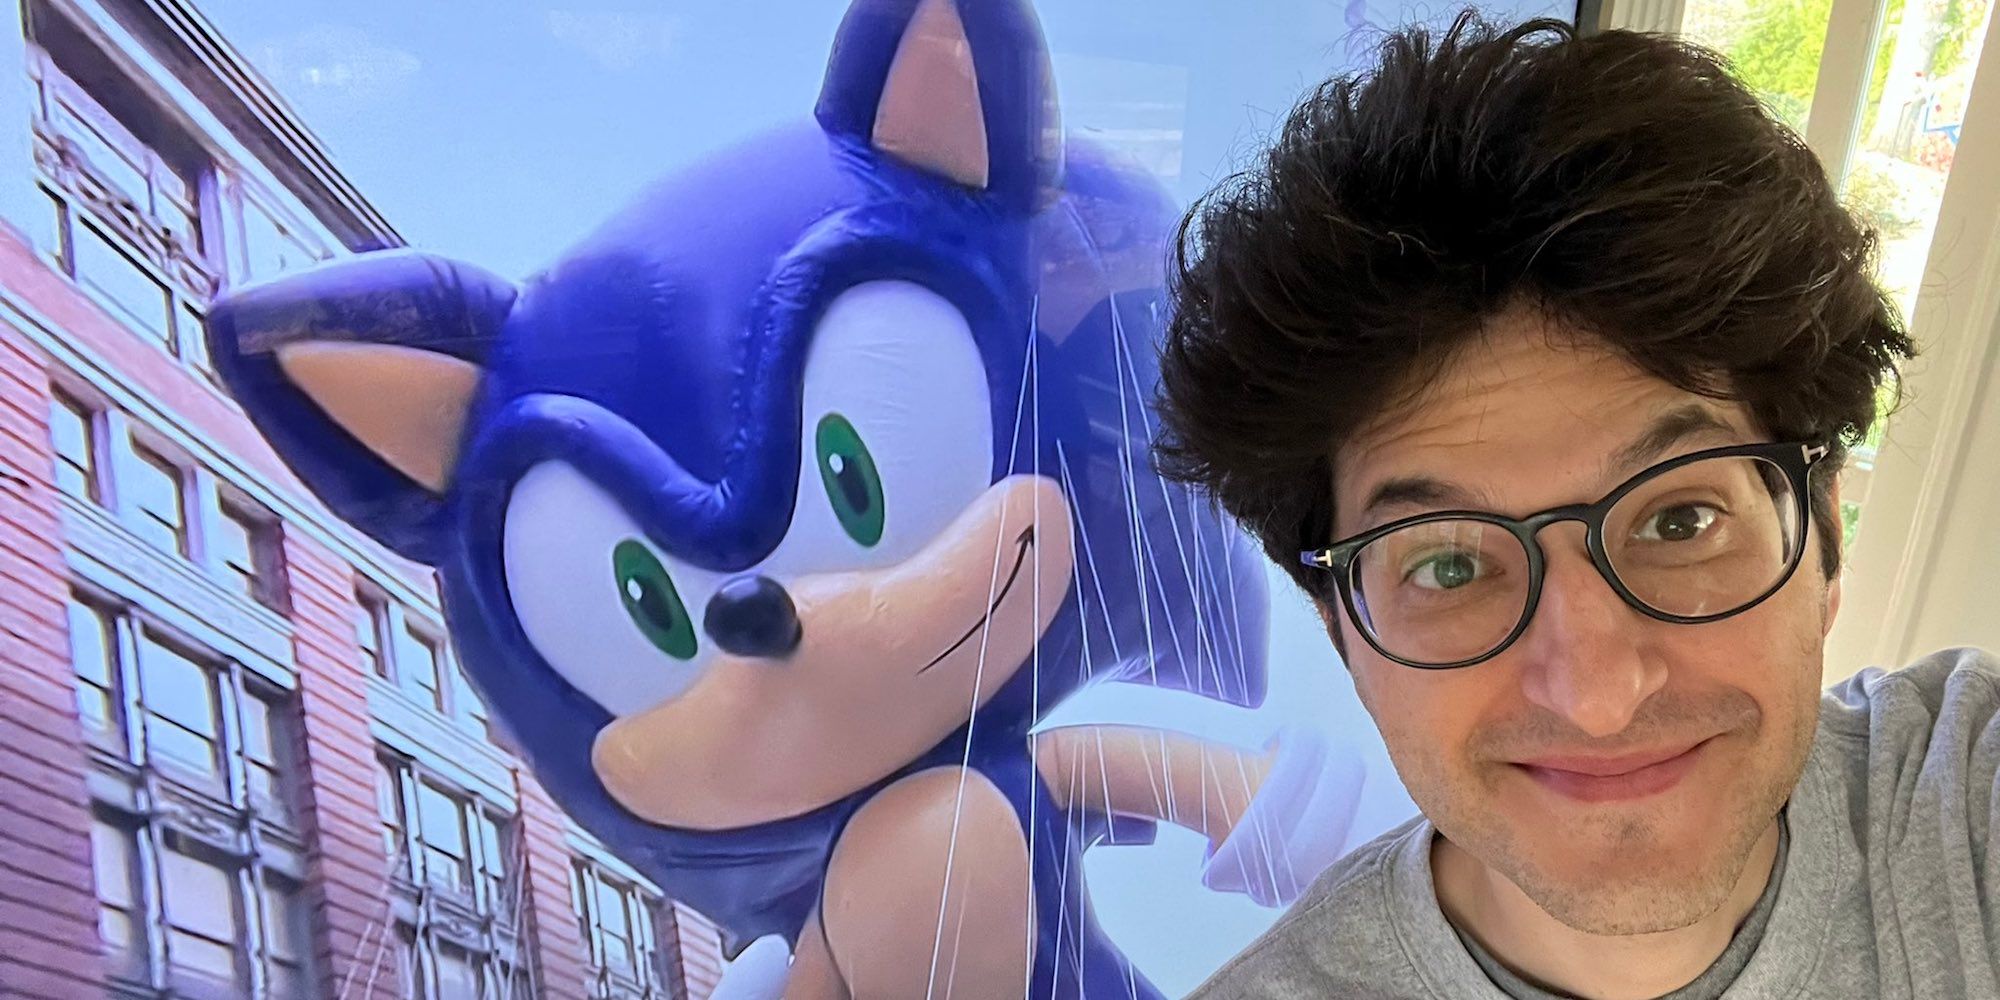 Ben Schwartz with Sonic the Hedgehog at the Macy's Thanksgiving Day Parade